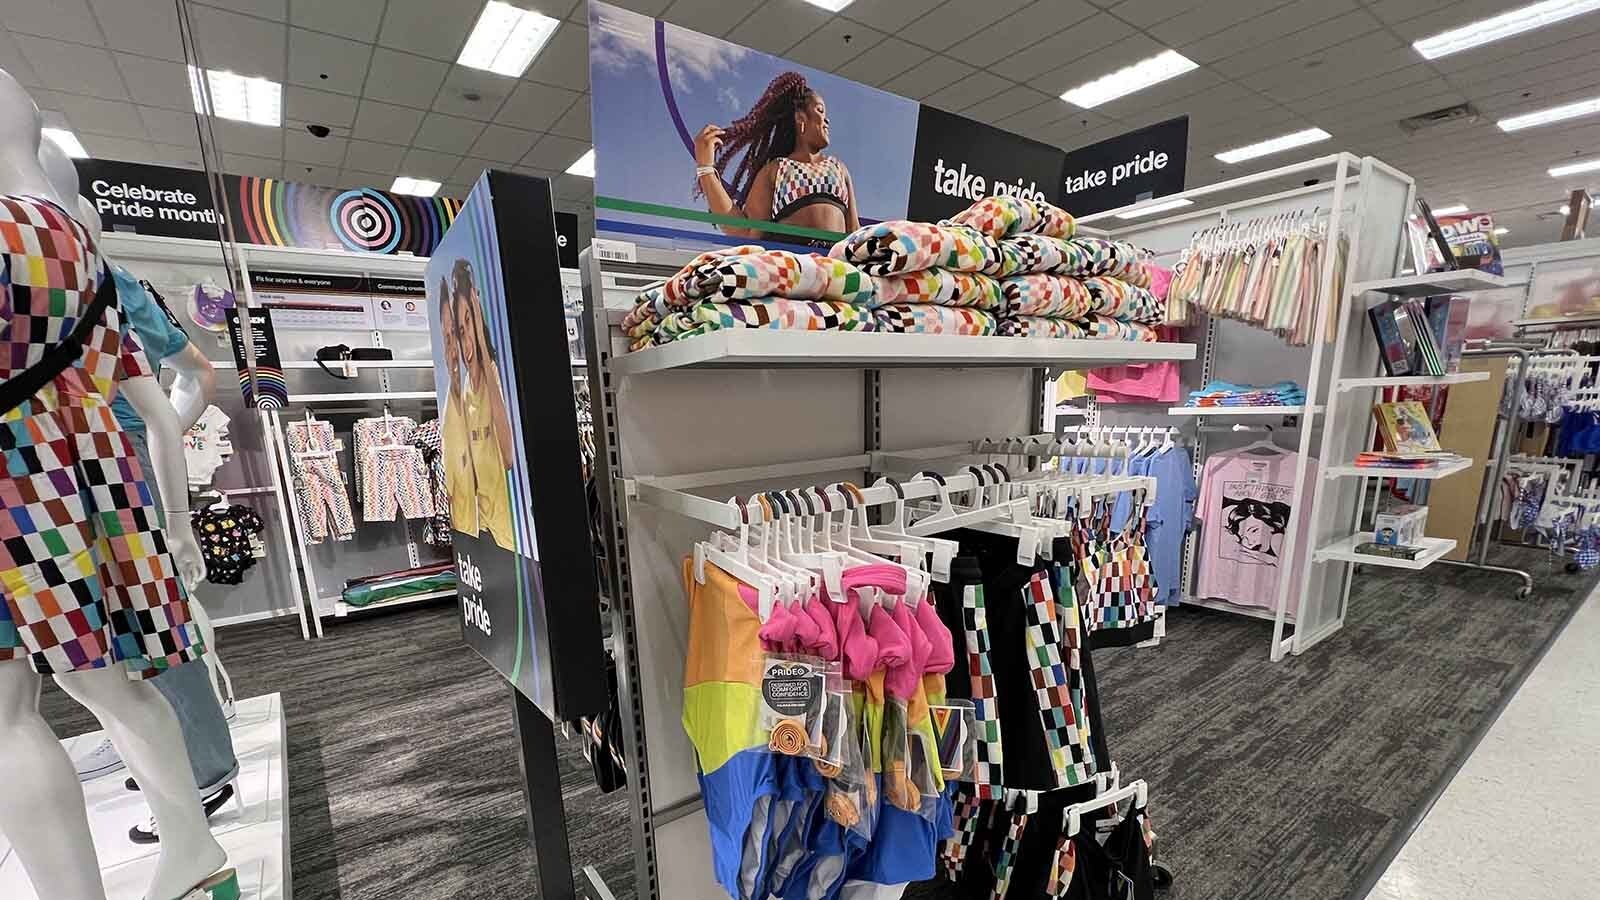 Target's "Pride Collection" in the retailer's Cheyenne store.